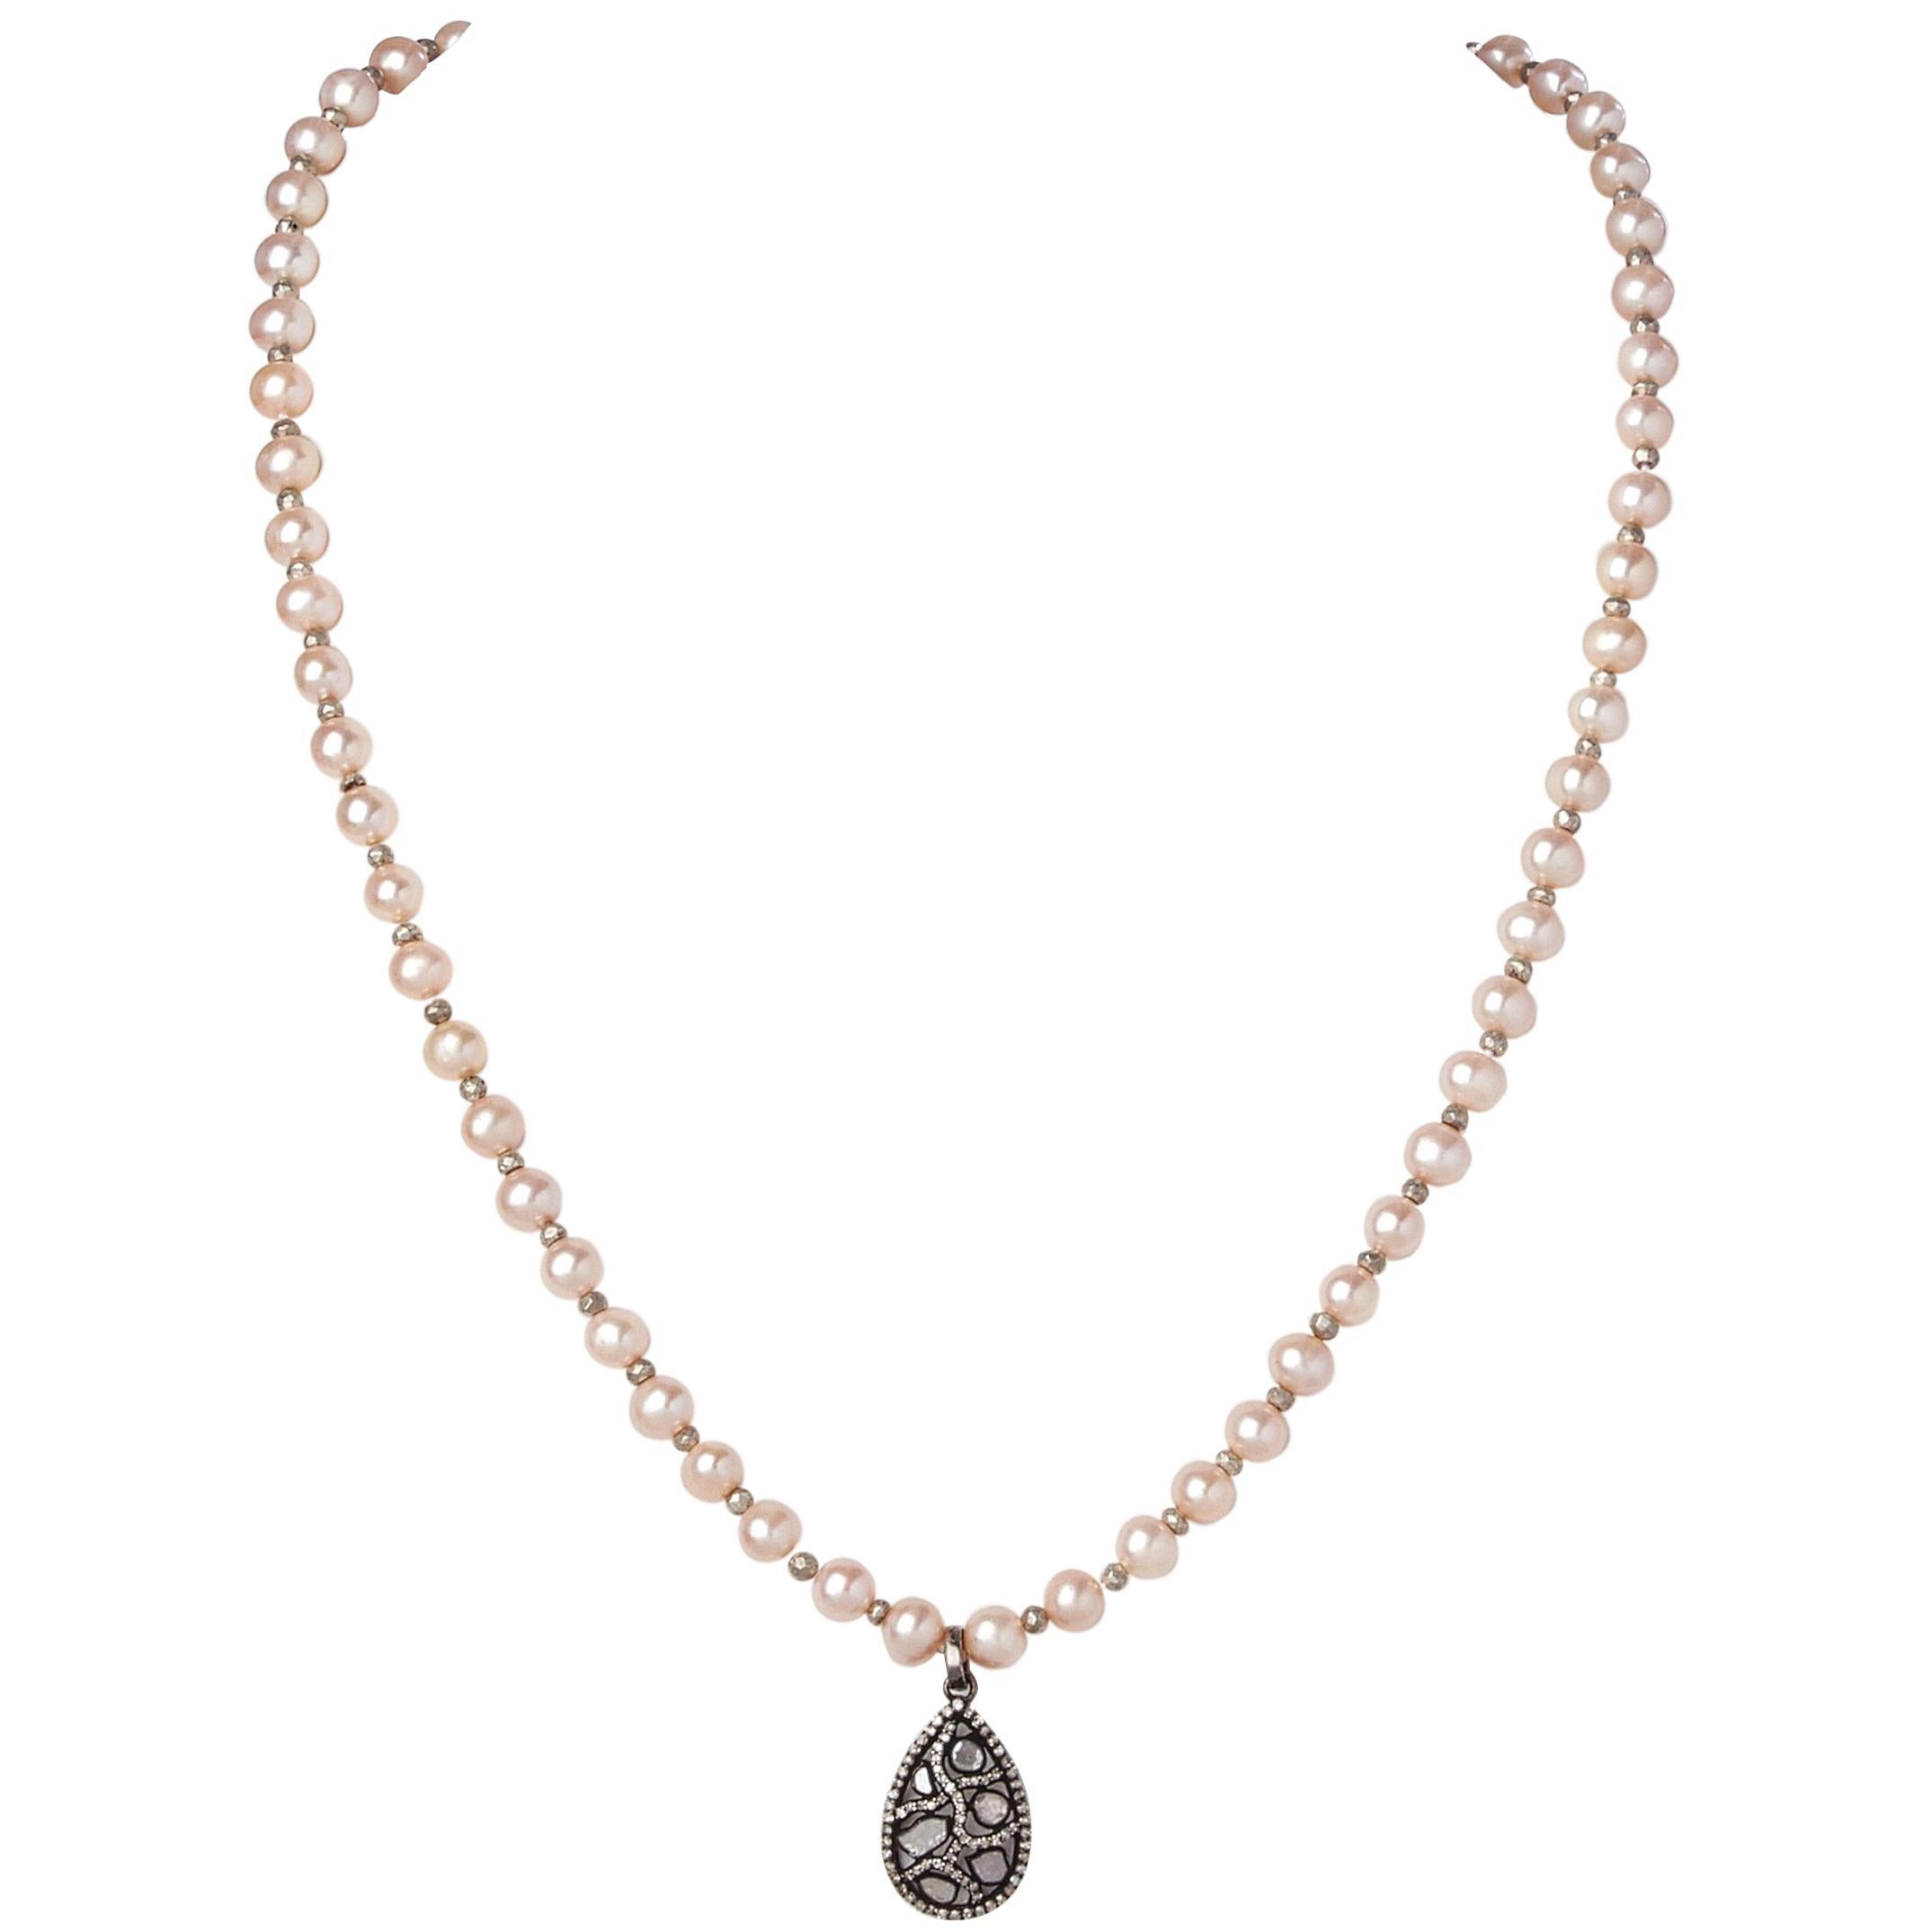 Blush Akoya Pearl Necklace with Teardrop Diamond Sterling Silver Pendant For Sale